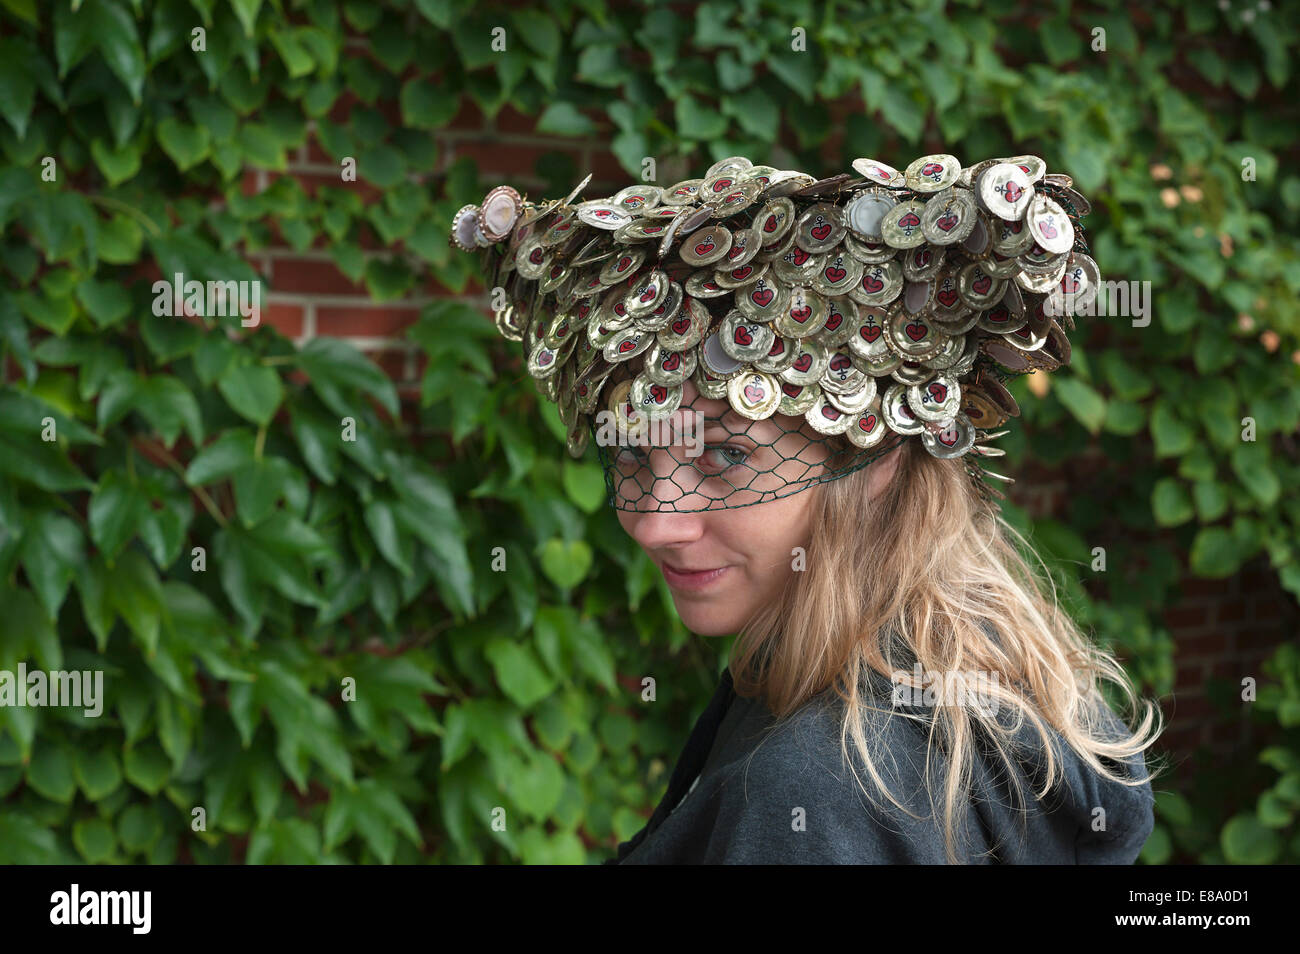 Young woman wearing a hat made of crown corks in front of a wall of leaves, Germany Stock Photo